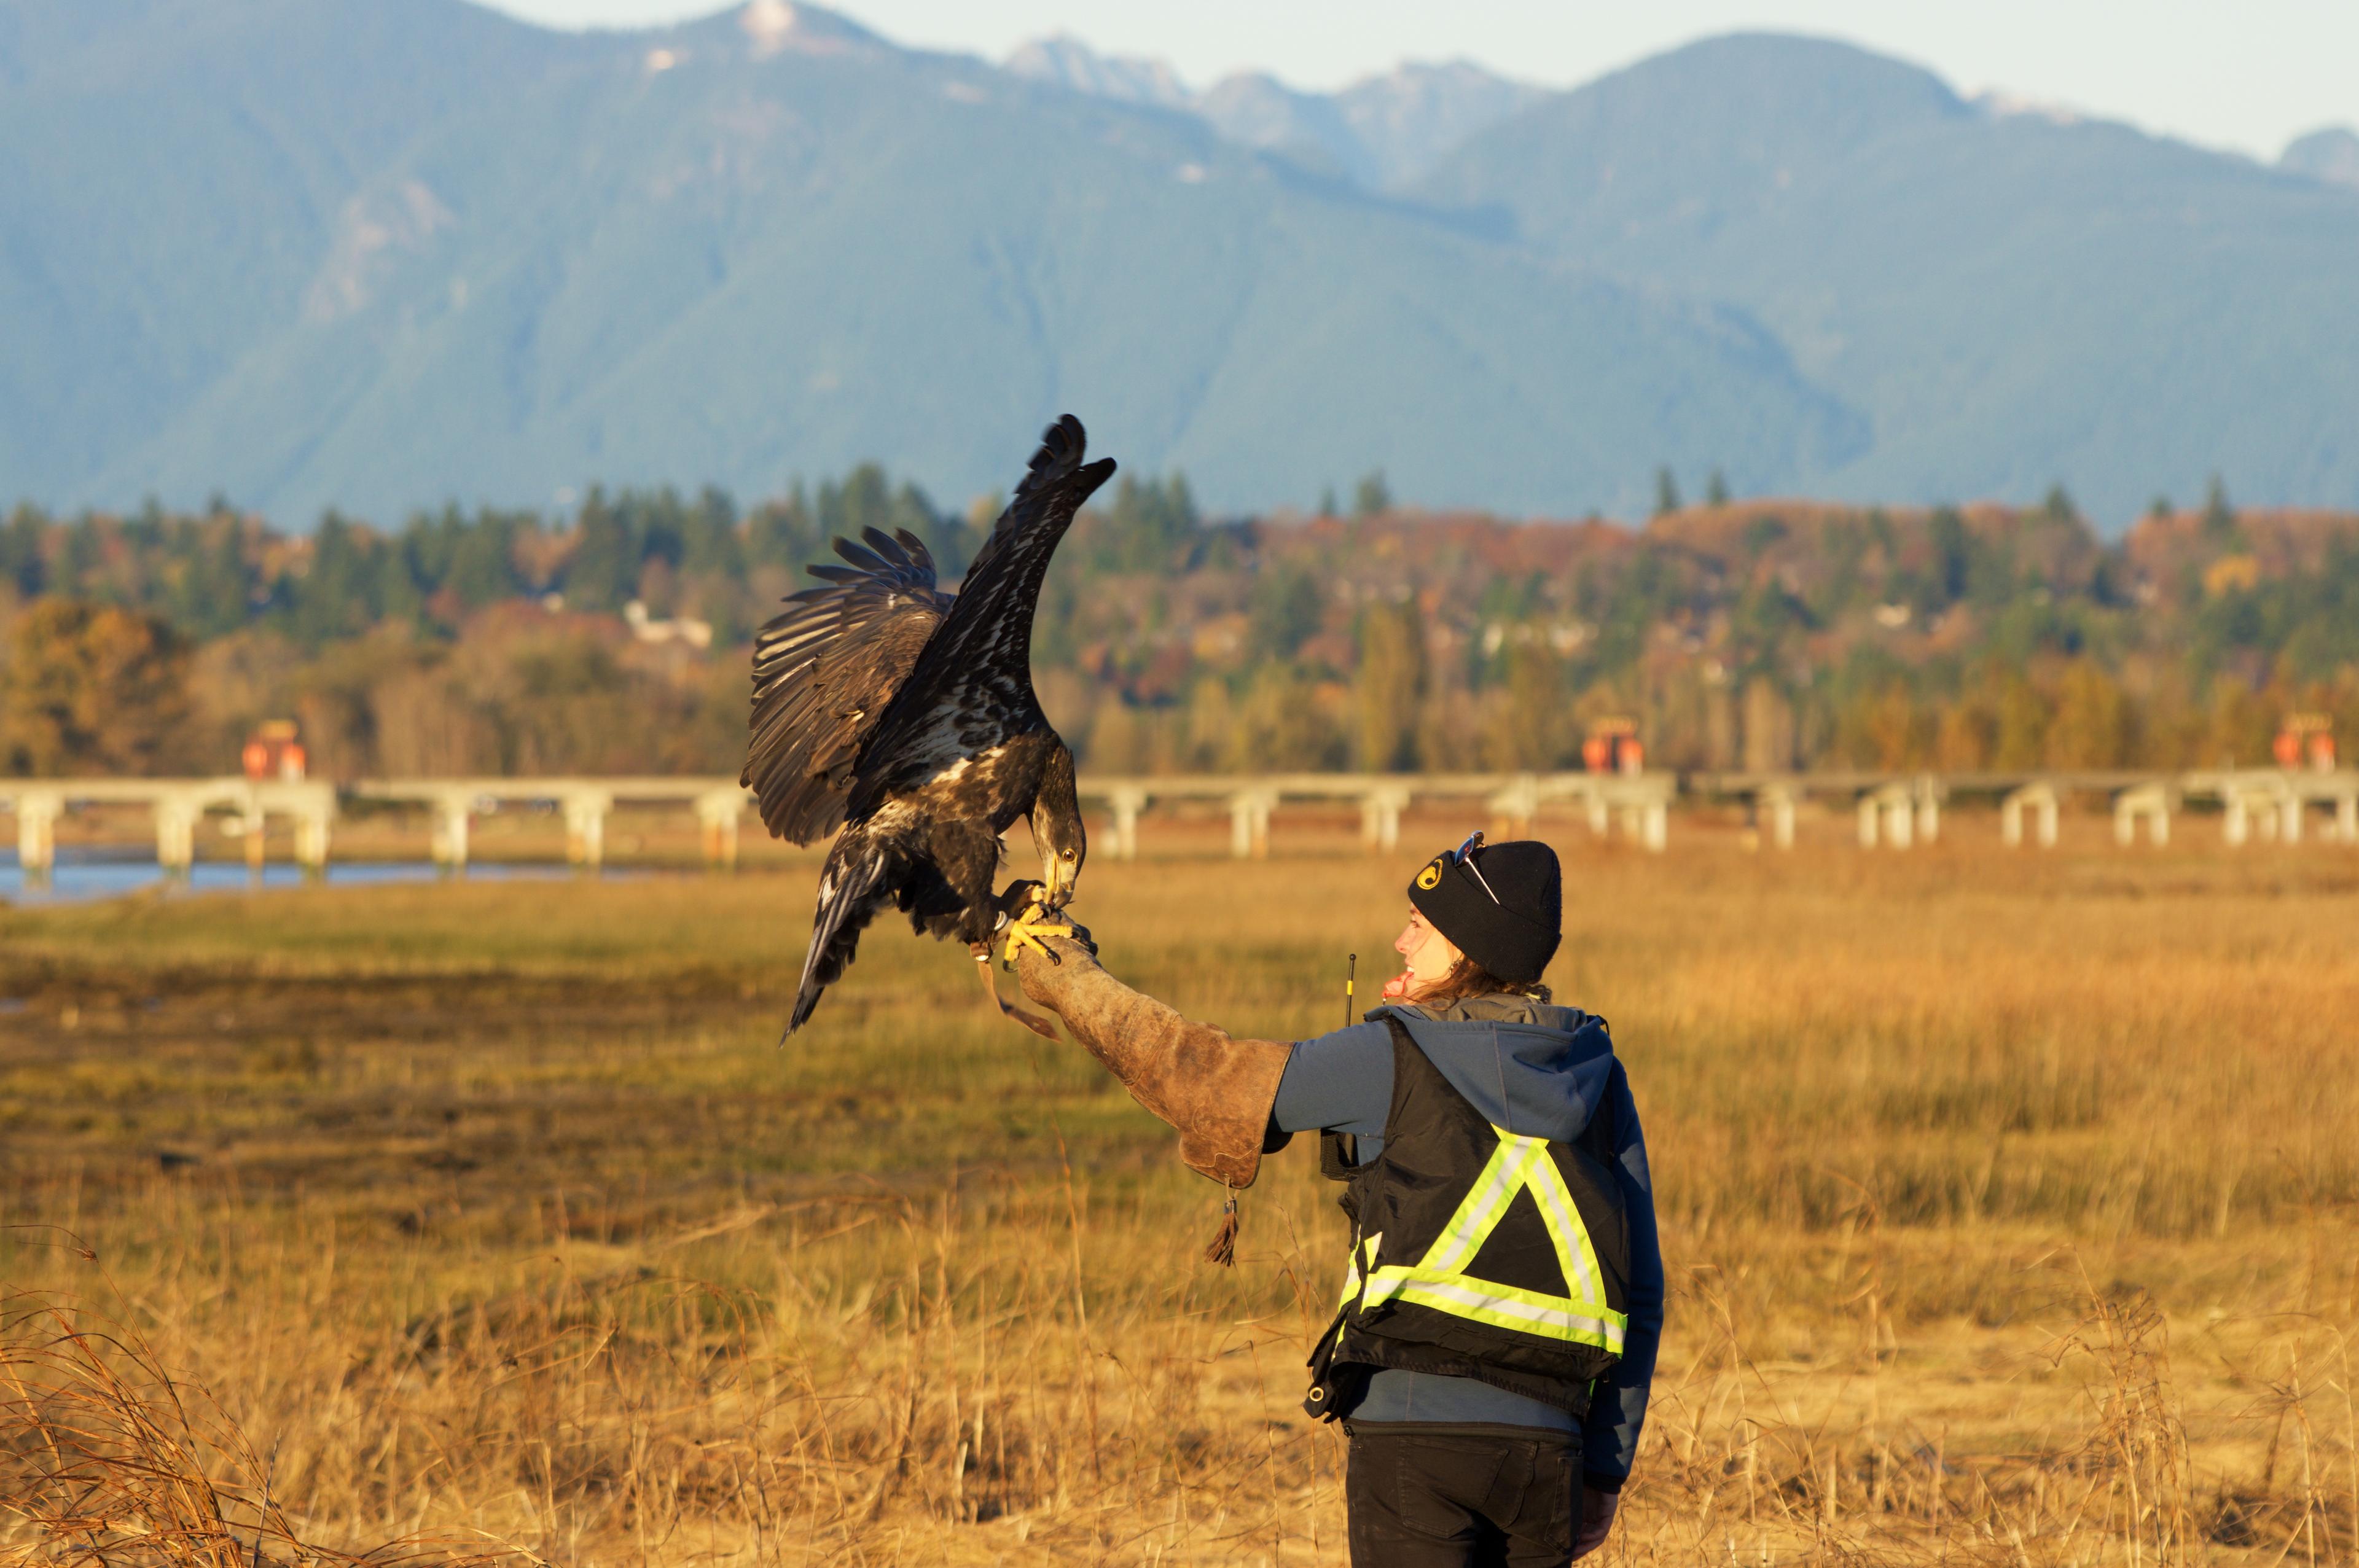 A Raptors employee calls a young bald eagle to her glove on an airfield